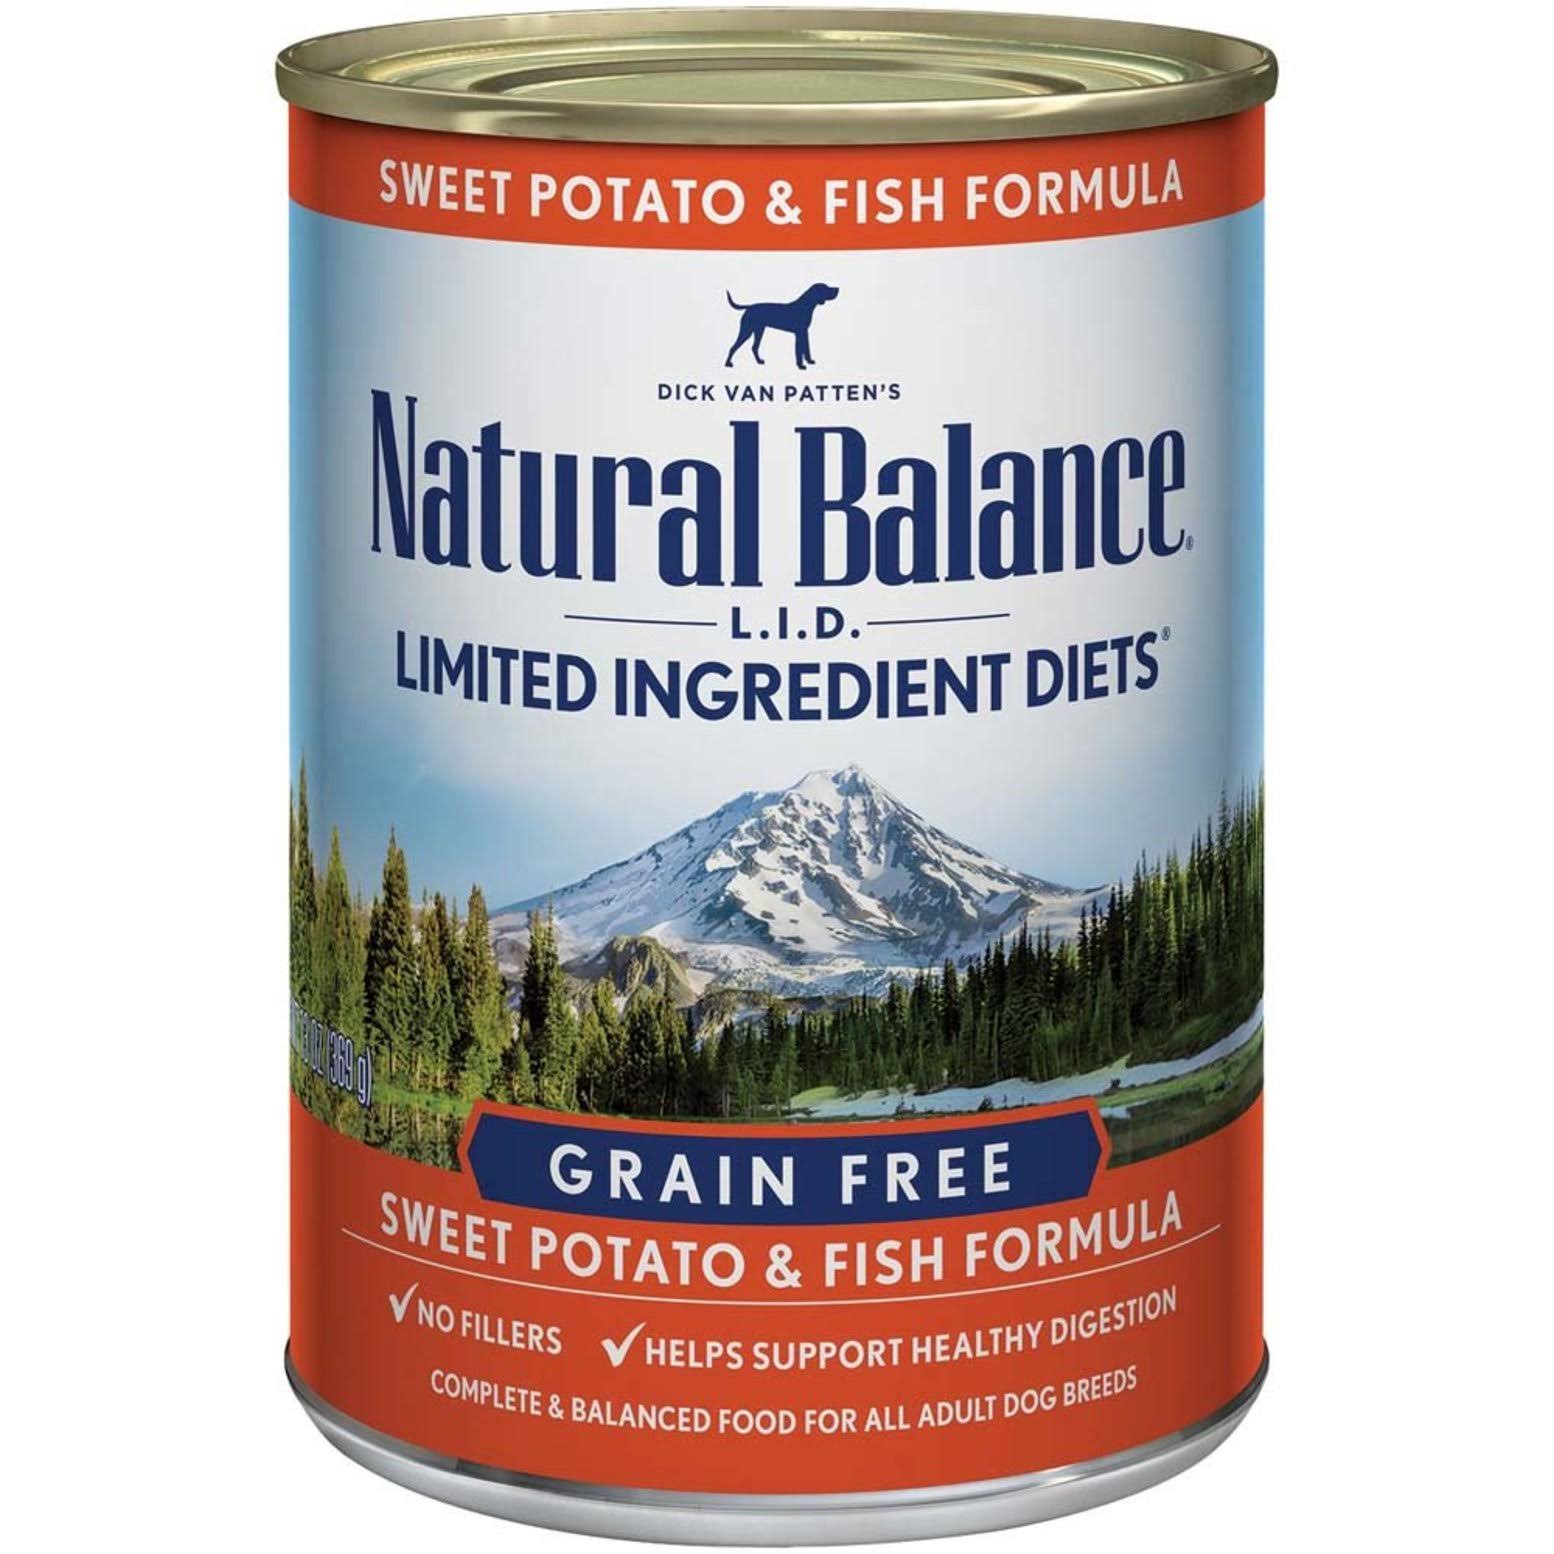 Natural Balance Limited Ingredient Diets Dog Food - Sweet Potato and Fish